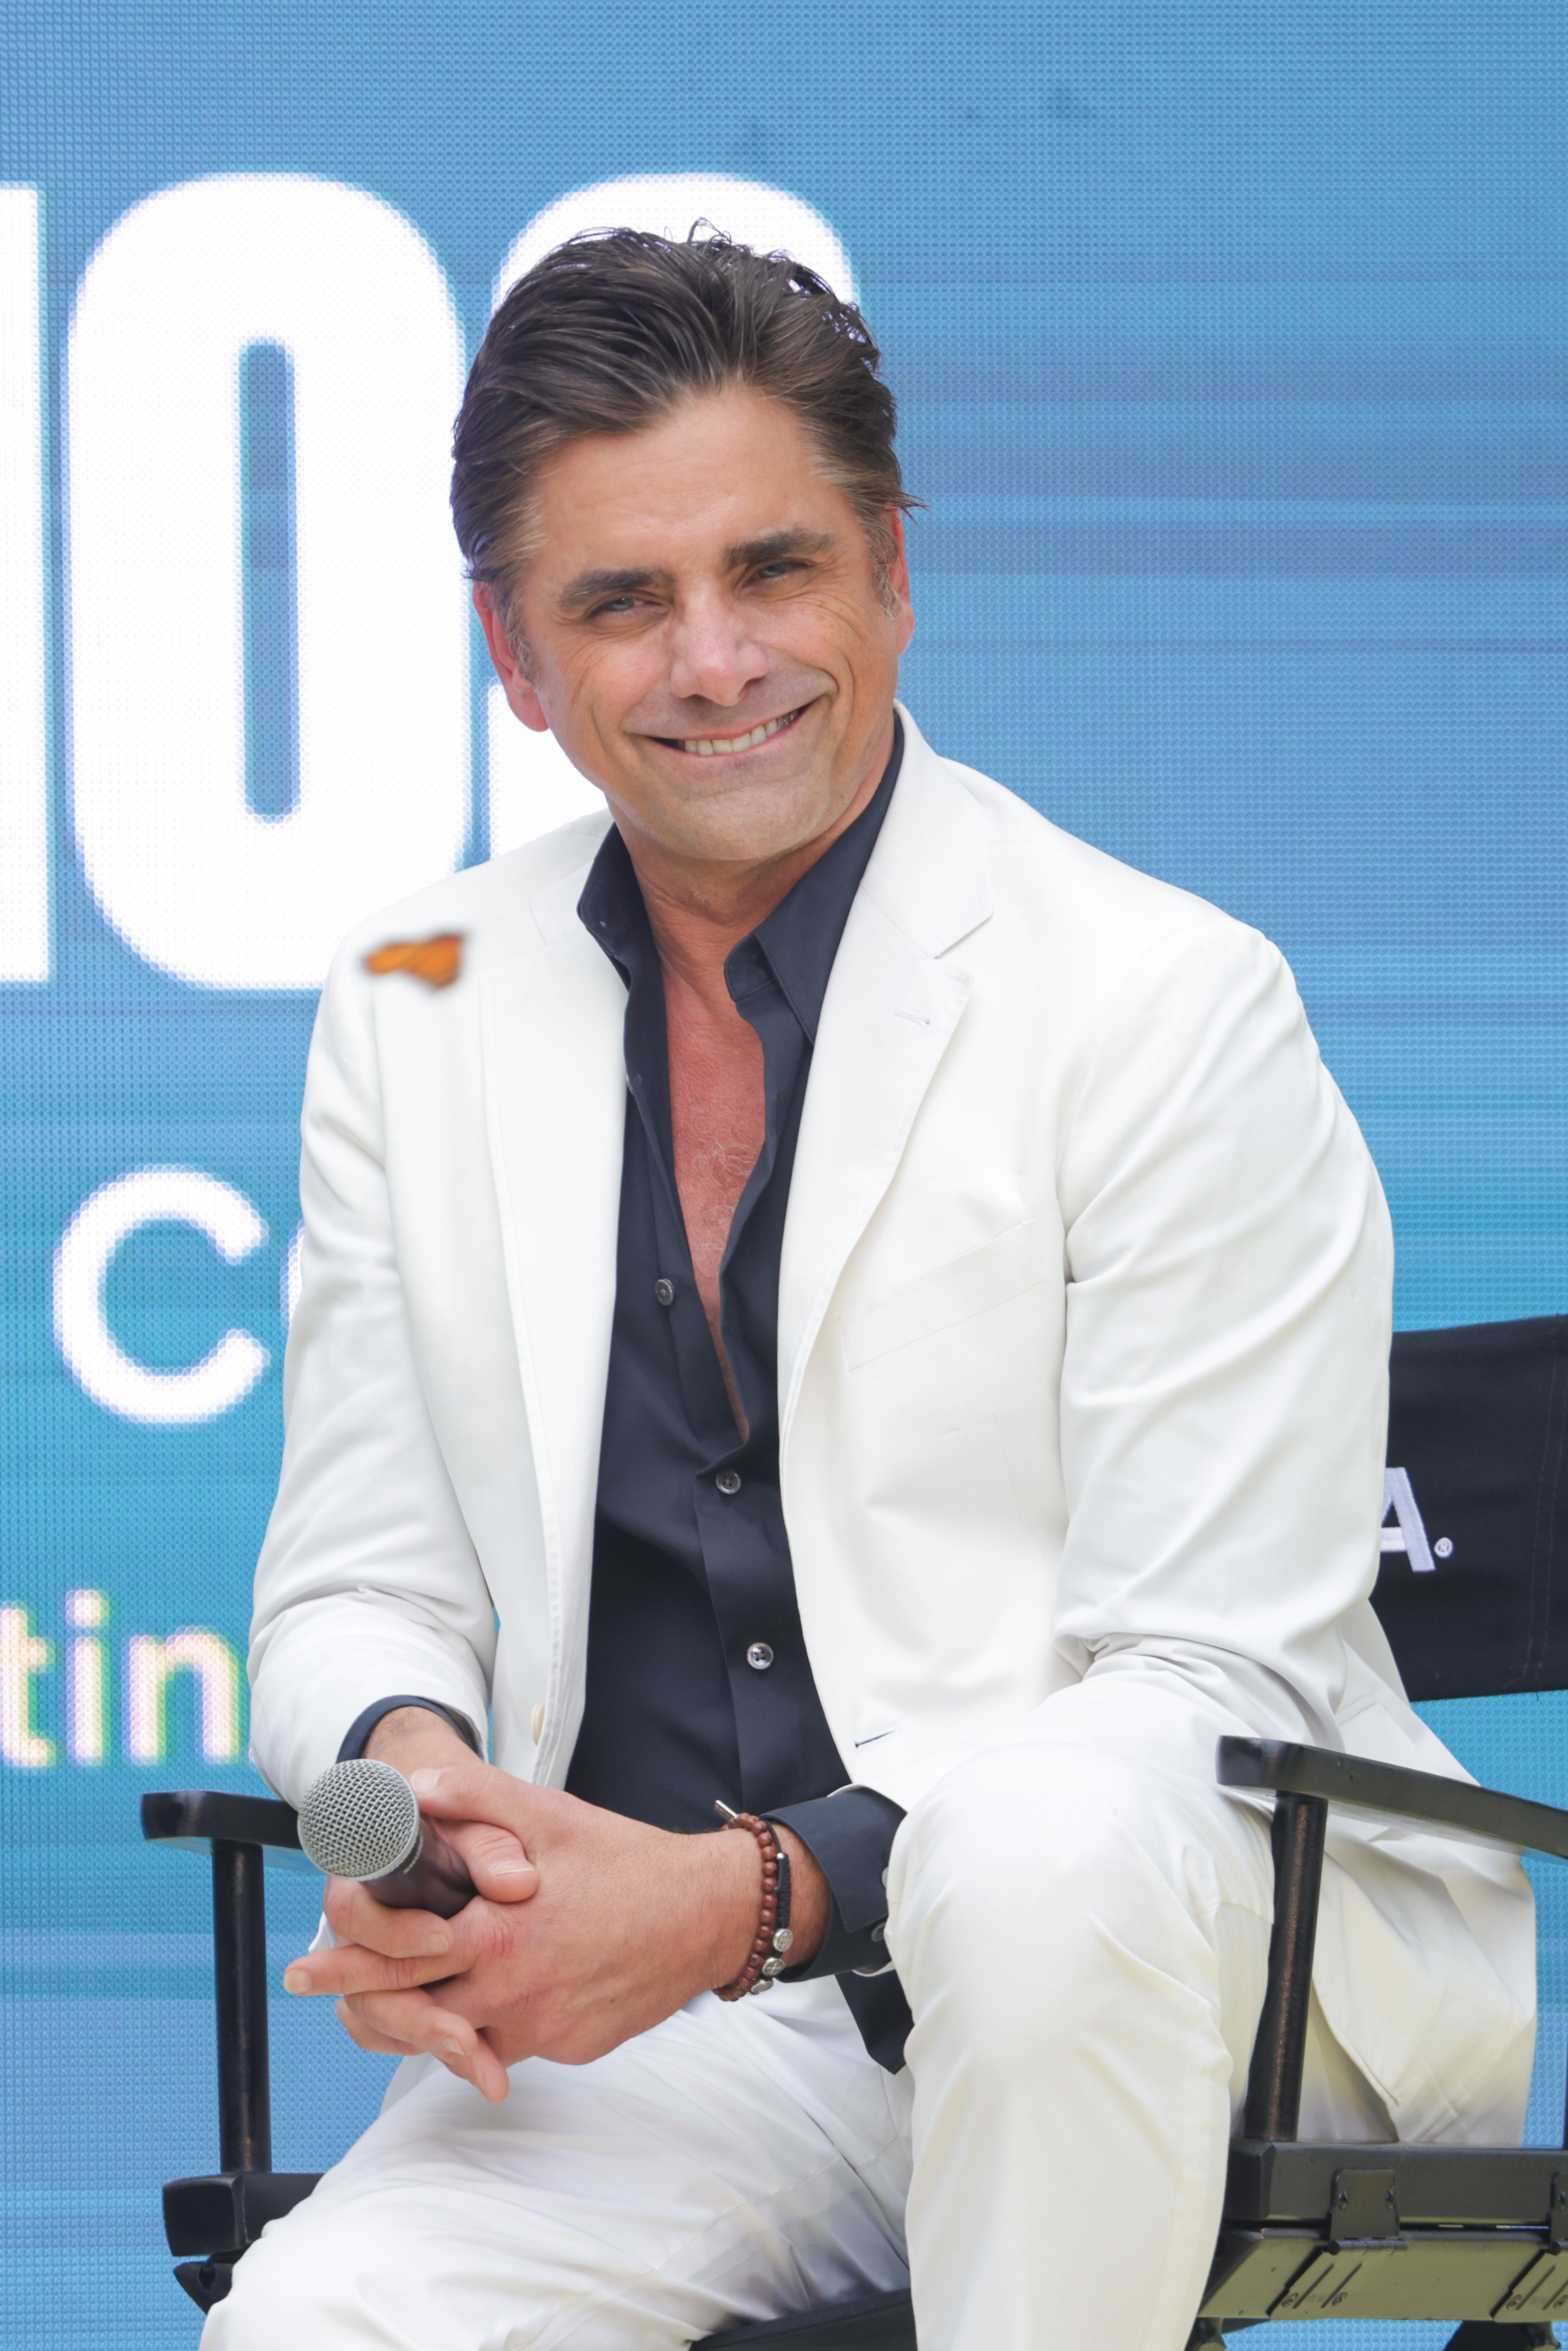 John in a white suit seated with a microphone, smiling during an event